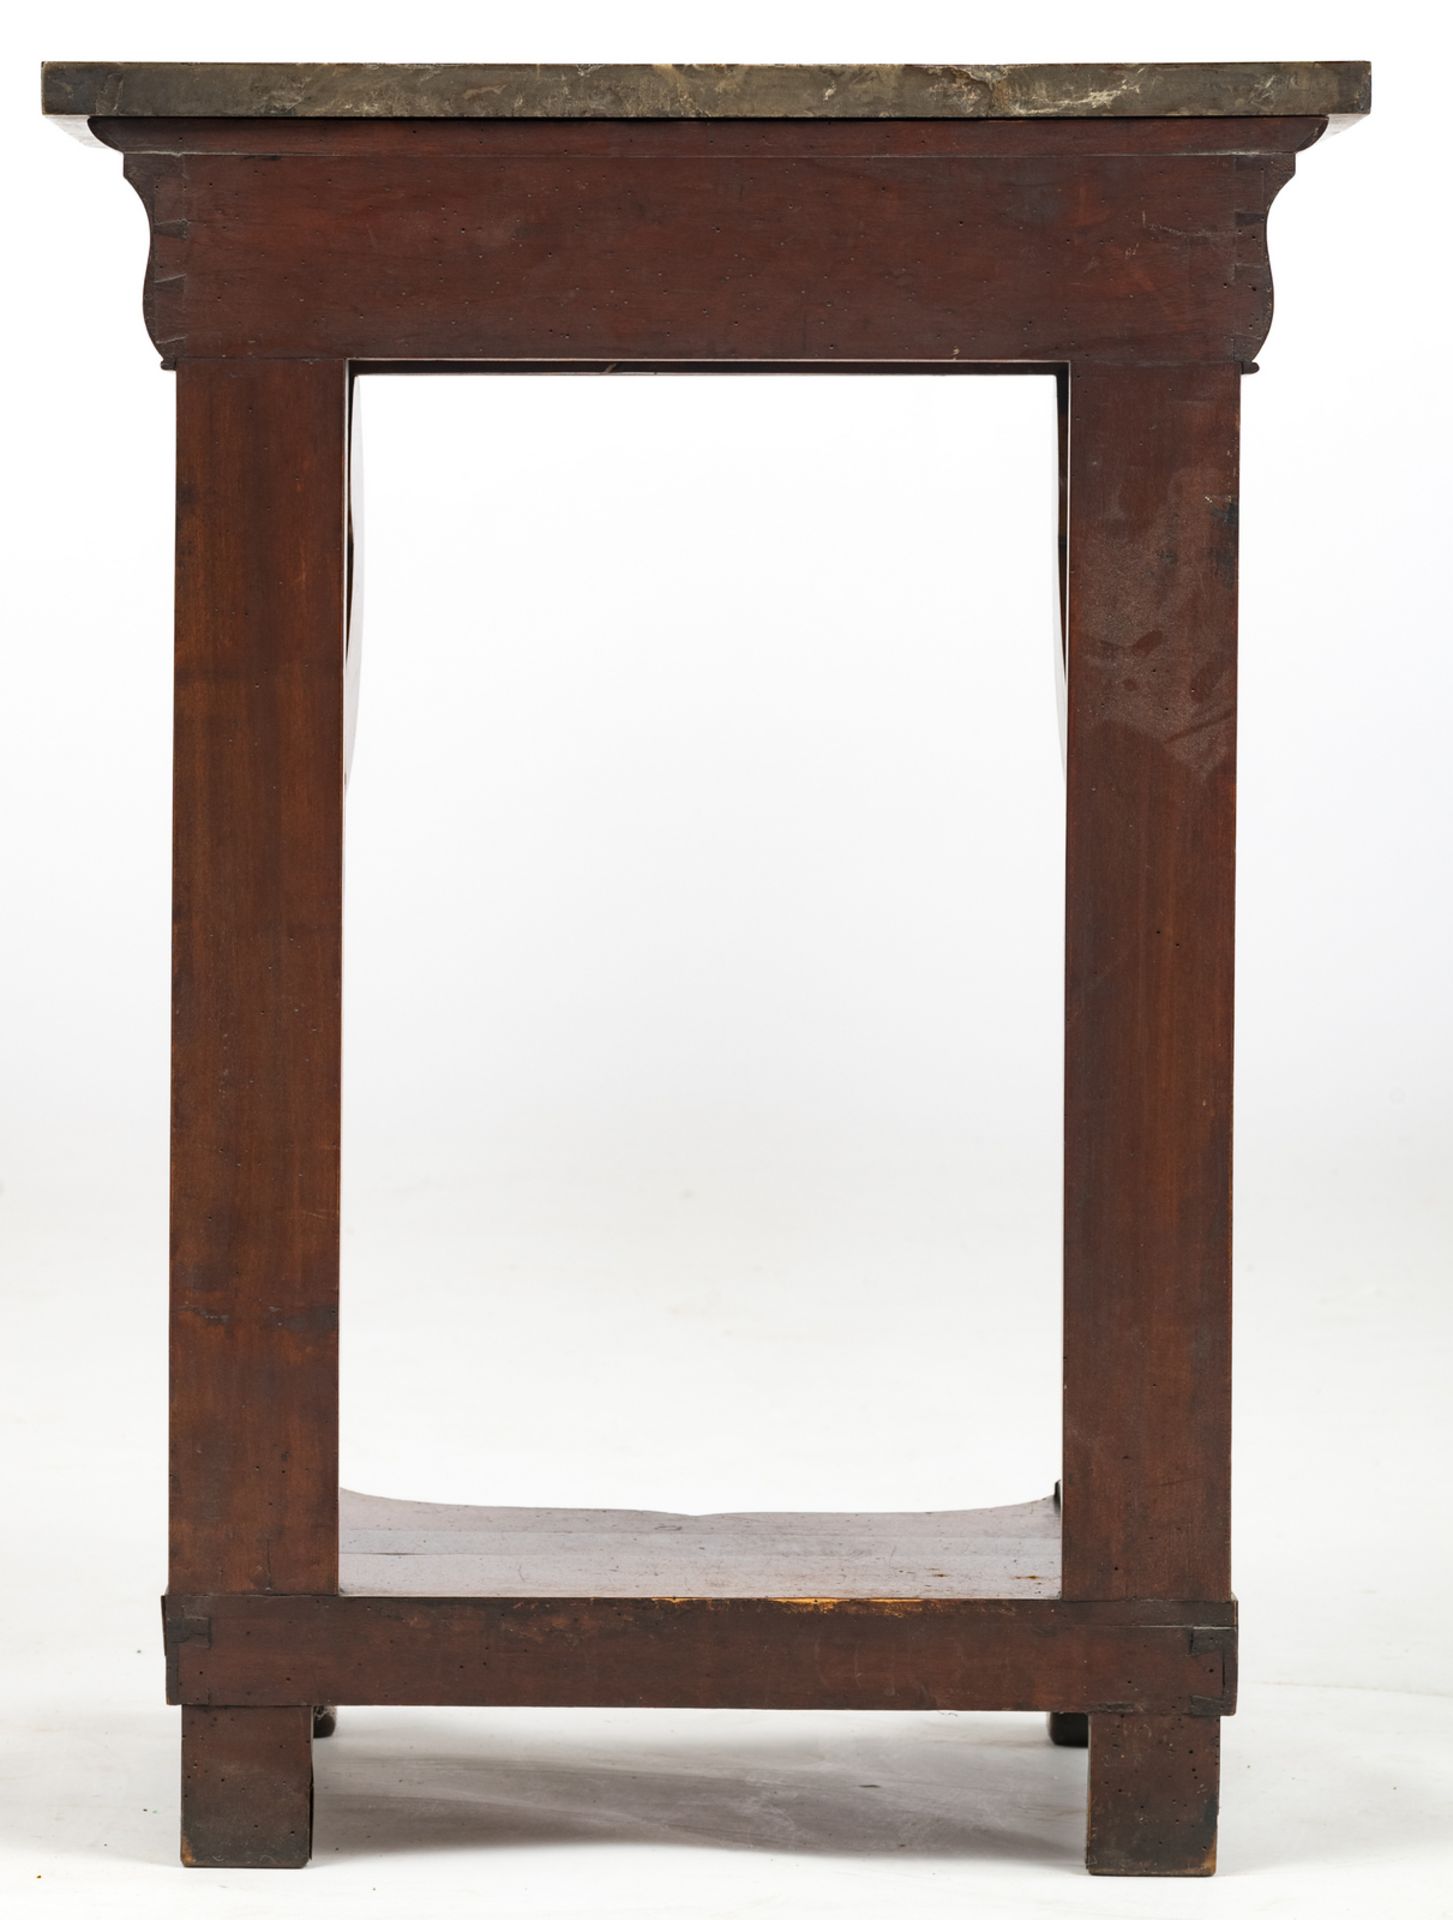 Louis Philippe mahogany console table with paw feet and marble top, H 79 - W 57,5 - D 42,5 cm - Image 4 of 10